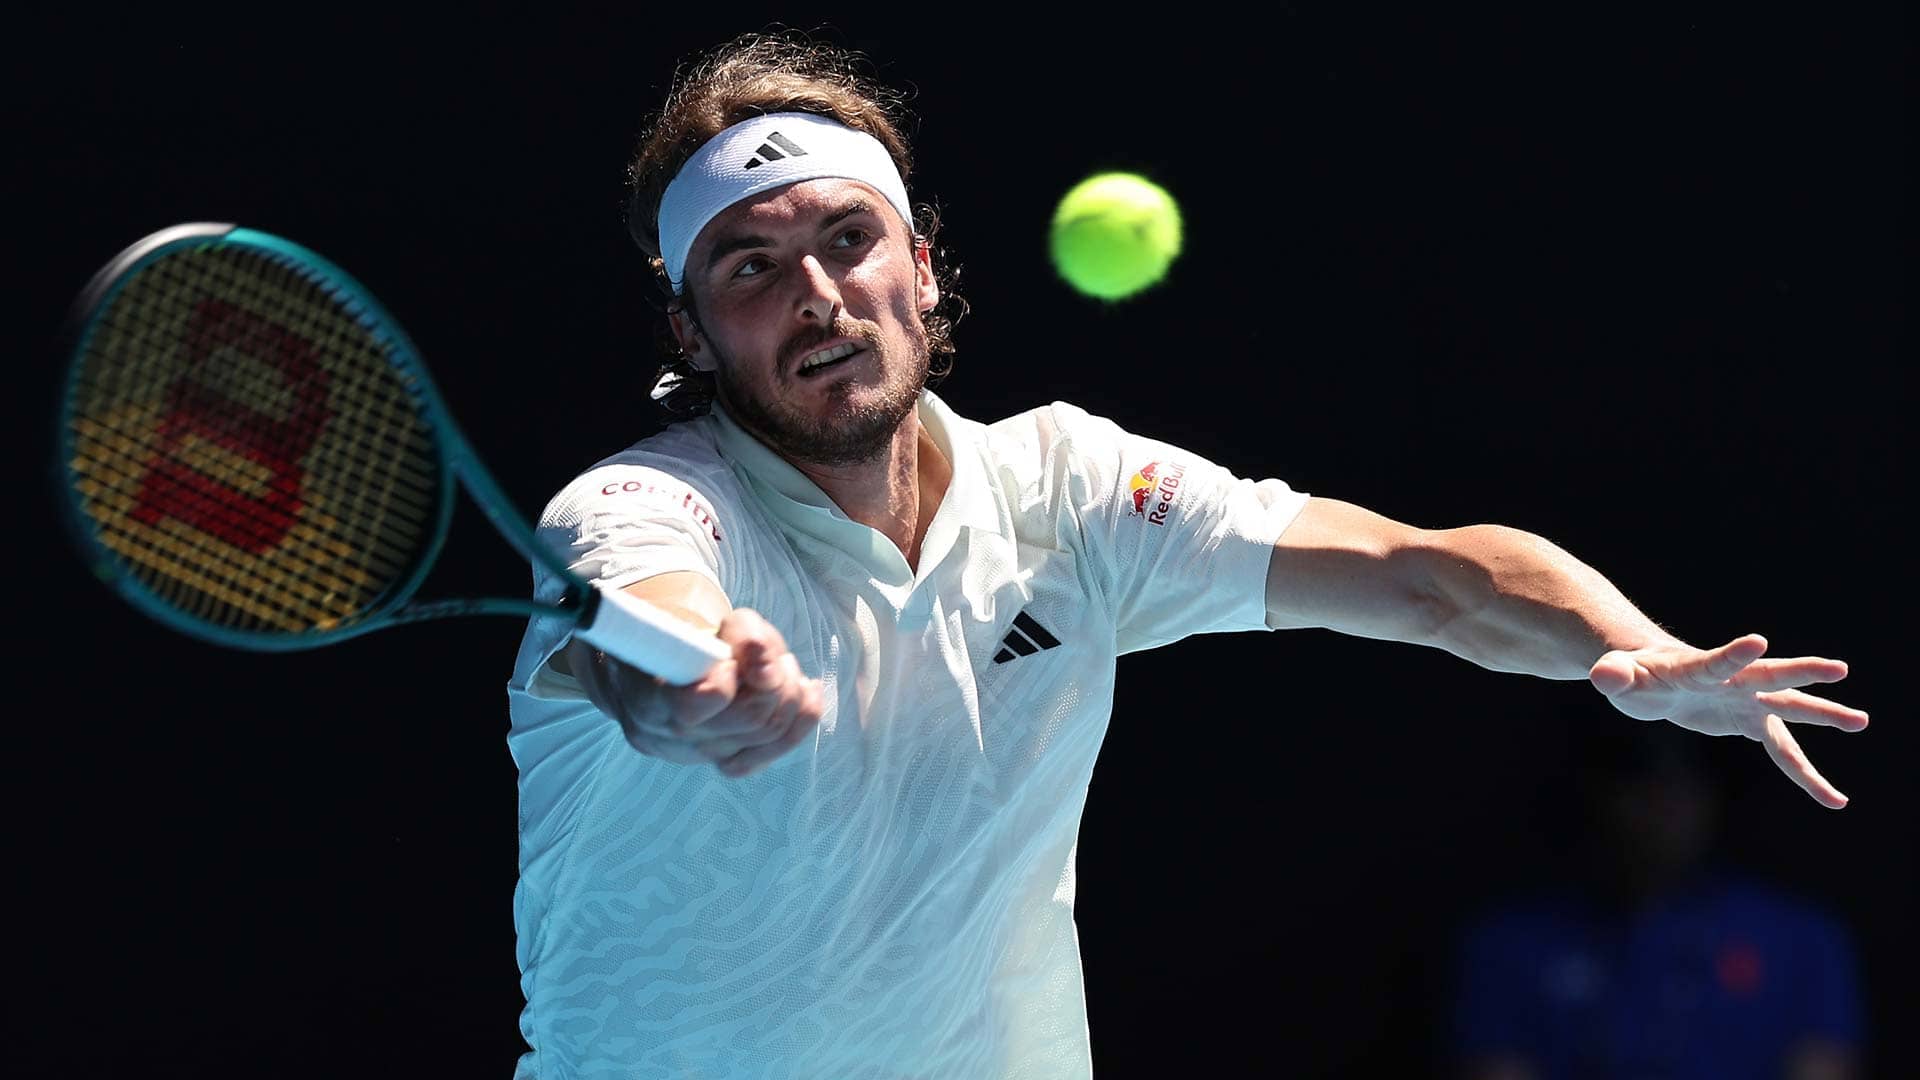 Stefanos Tsitsipas in action on Monday in Melbourne.